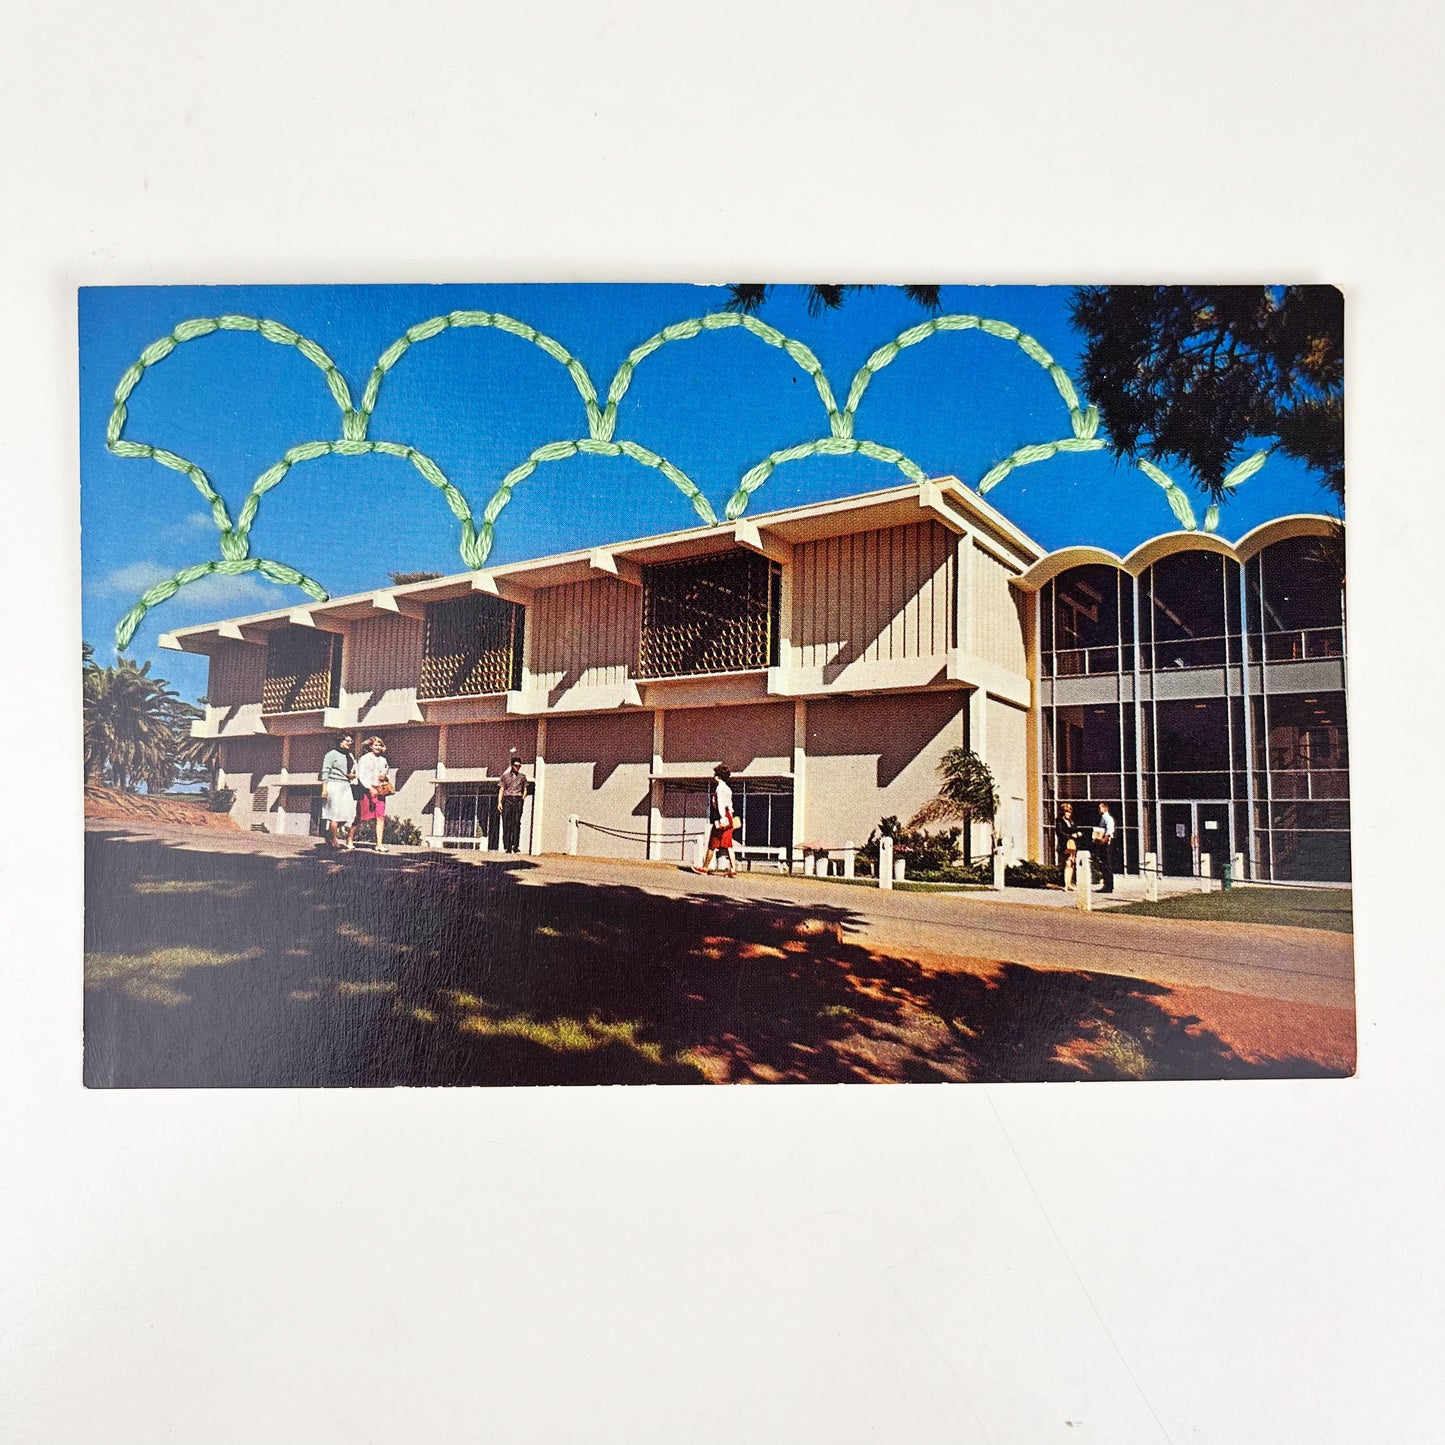 an old postcard of a building at a college in San Diego, with a hand embroidered overlapping circle design like scales in mint green stitched in the background on the sky only, the postcard is sitting on a white background